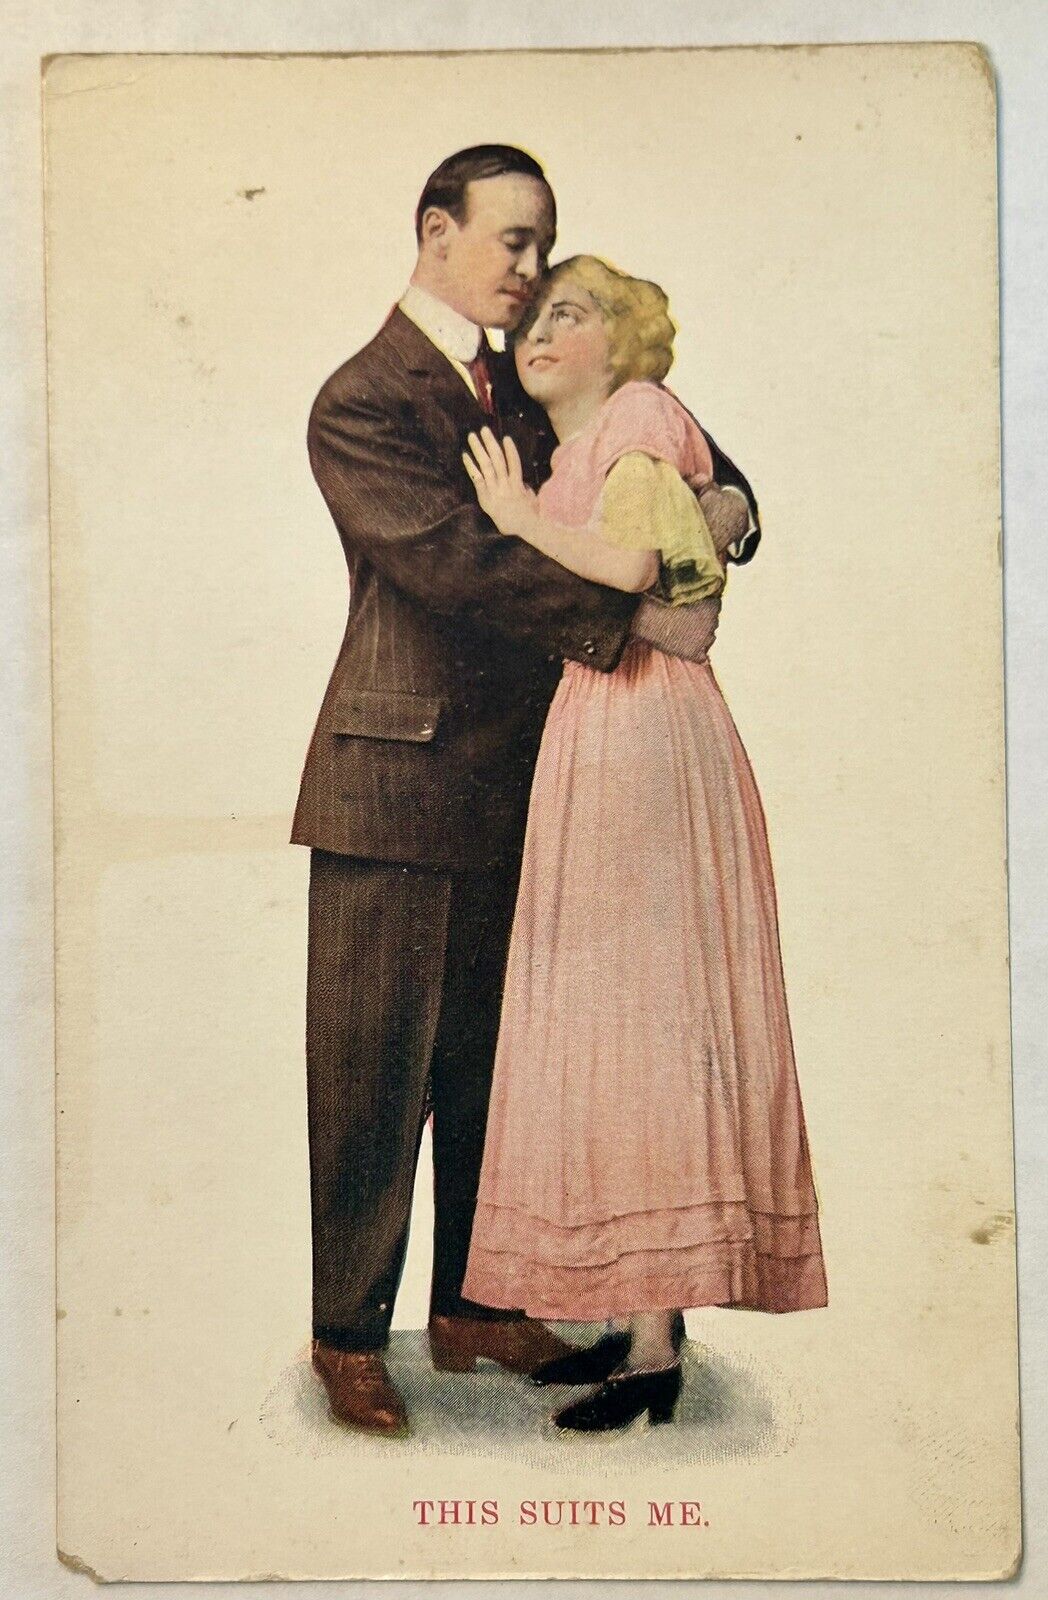 This Suits Me.  Couple Embracing. Vintage Love Romance Postcard. Early 1900s.